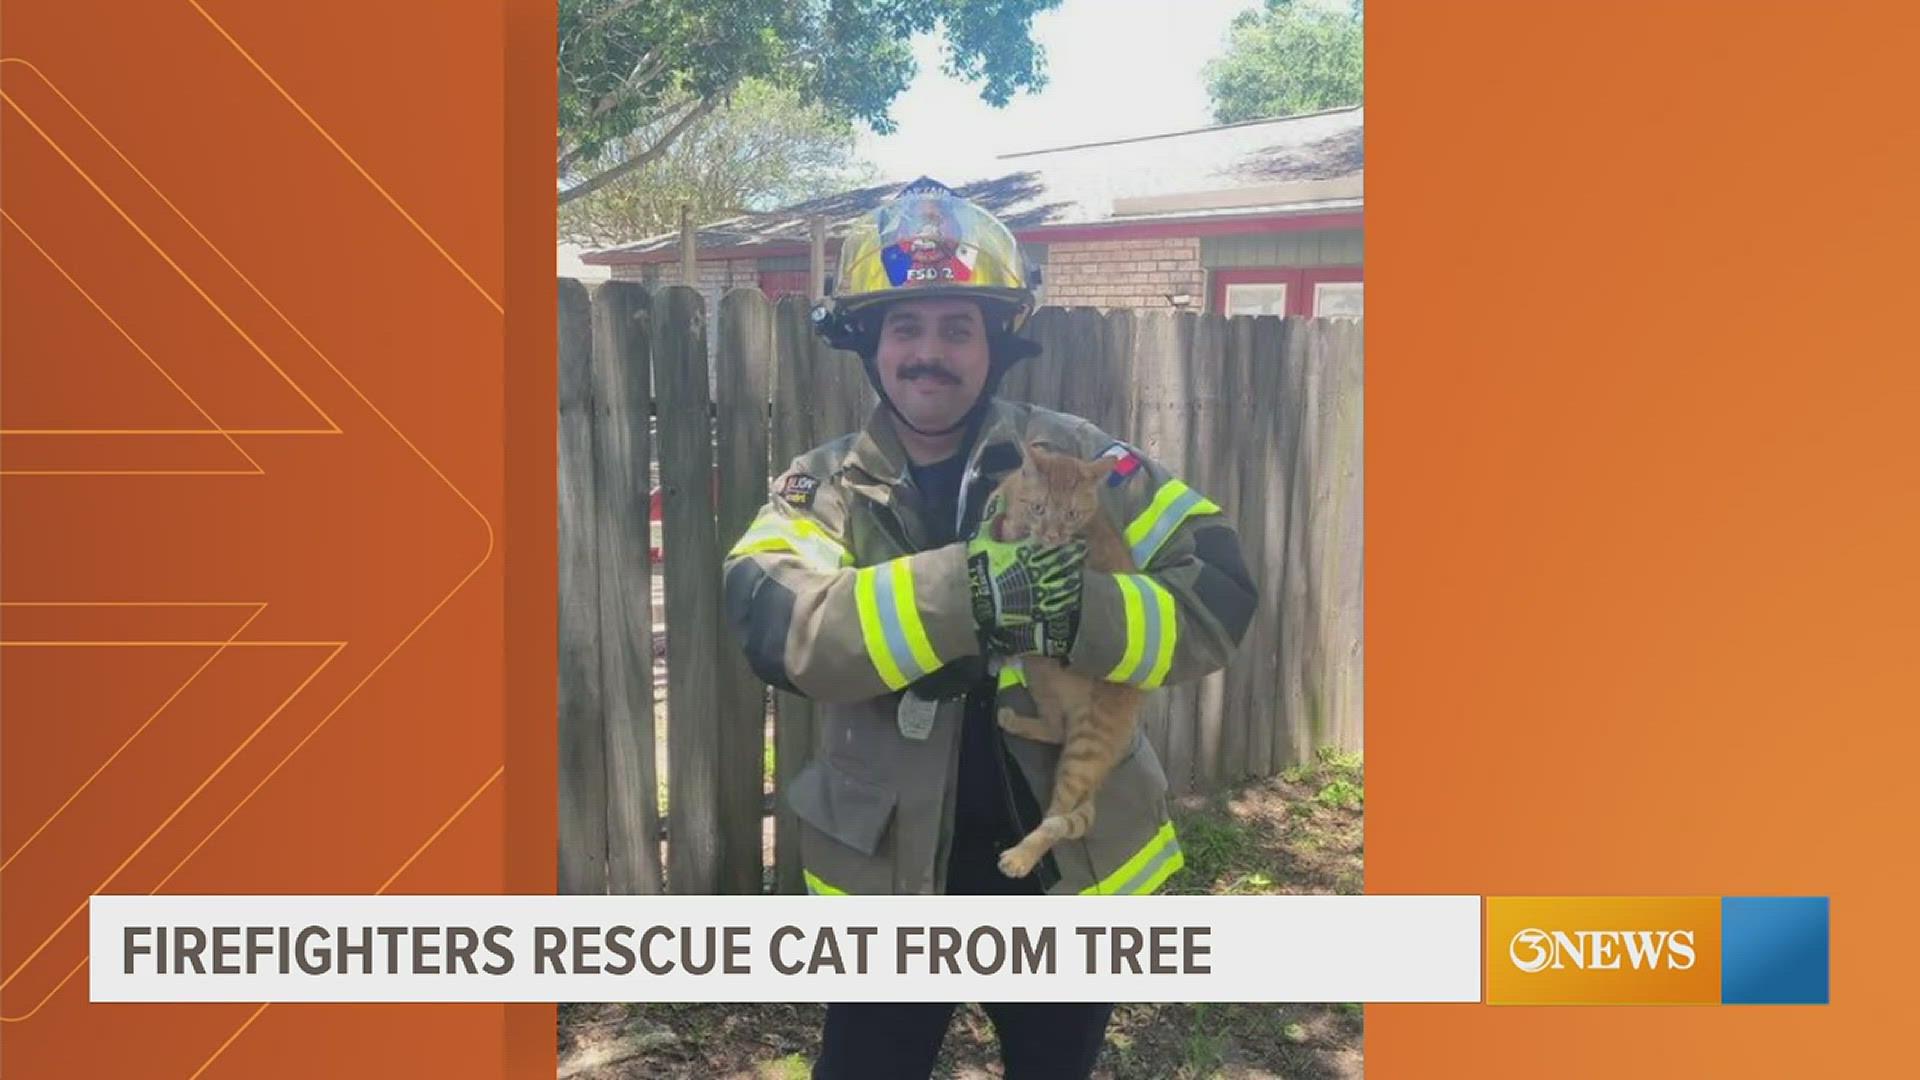 Two cats were brought down safely by the volunteer firefighters.